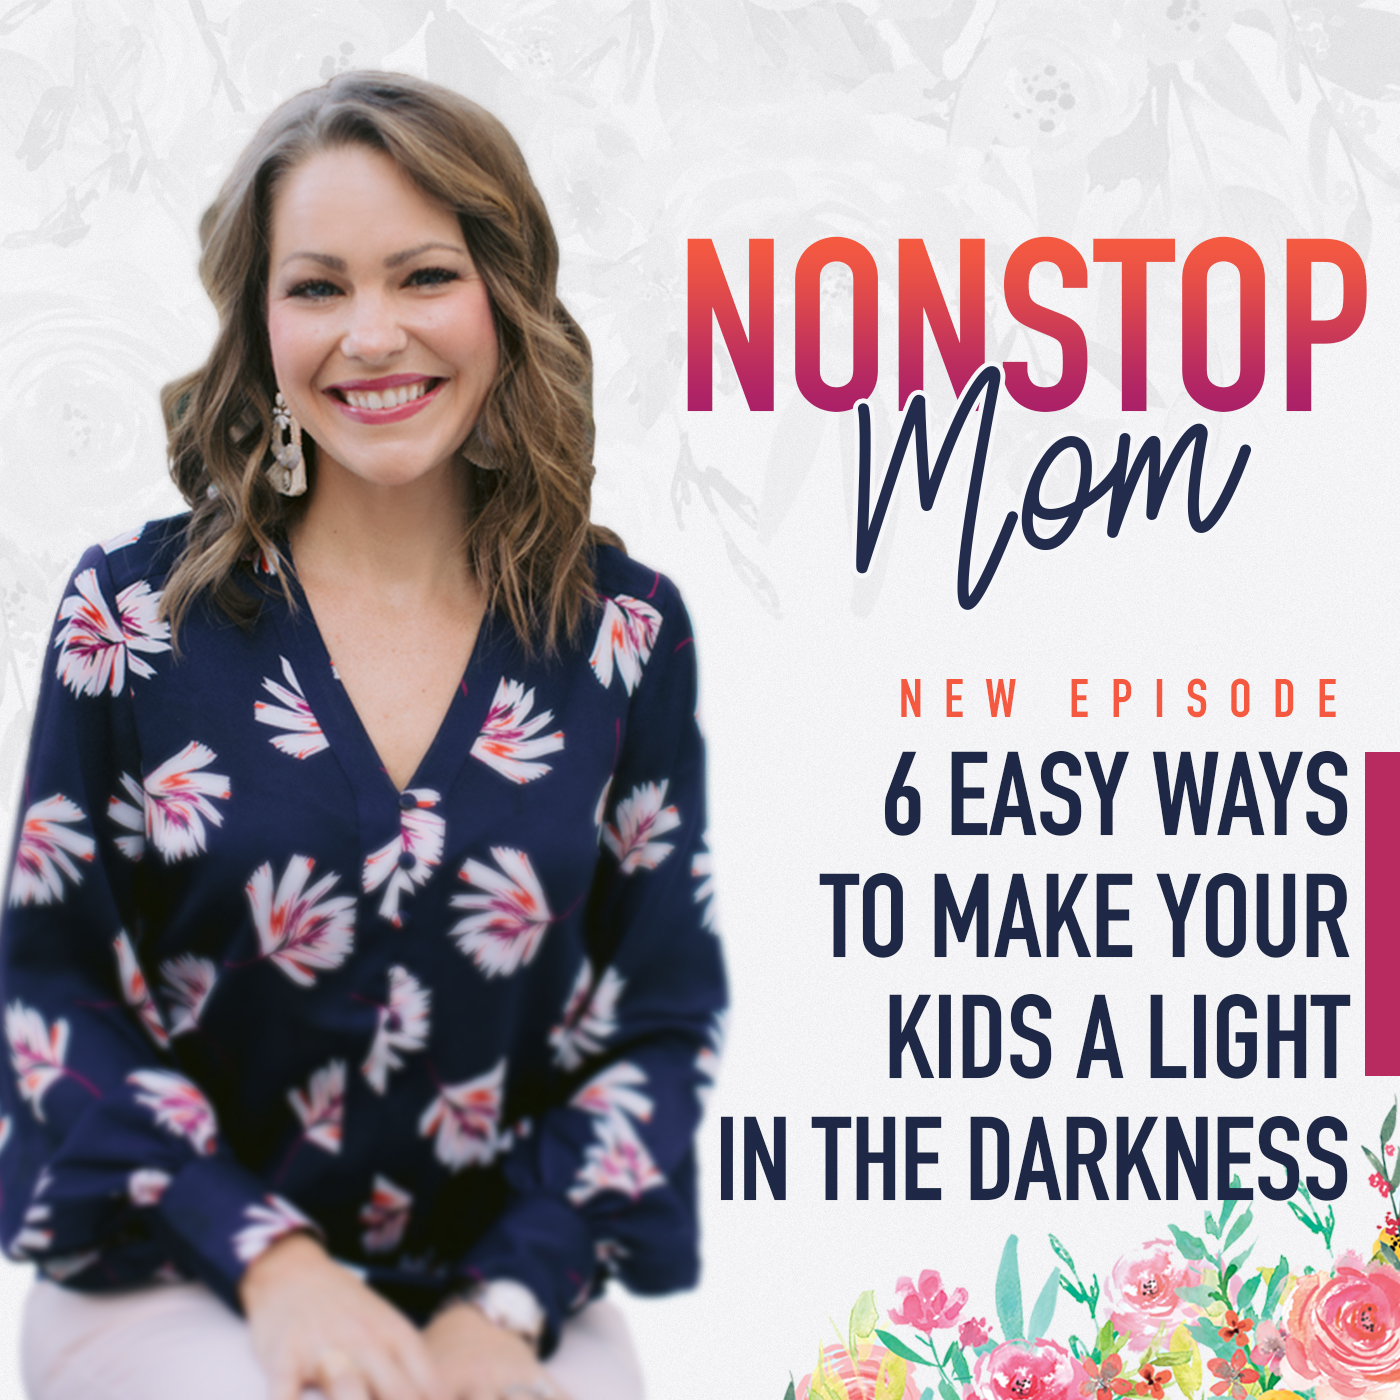 6 Easy Ways to Make Your Kids A Light In The Darkness with Carolyn Shuttlesworth on the Nonstop Mom Podcast